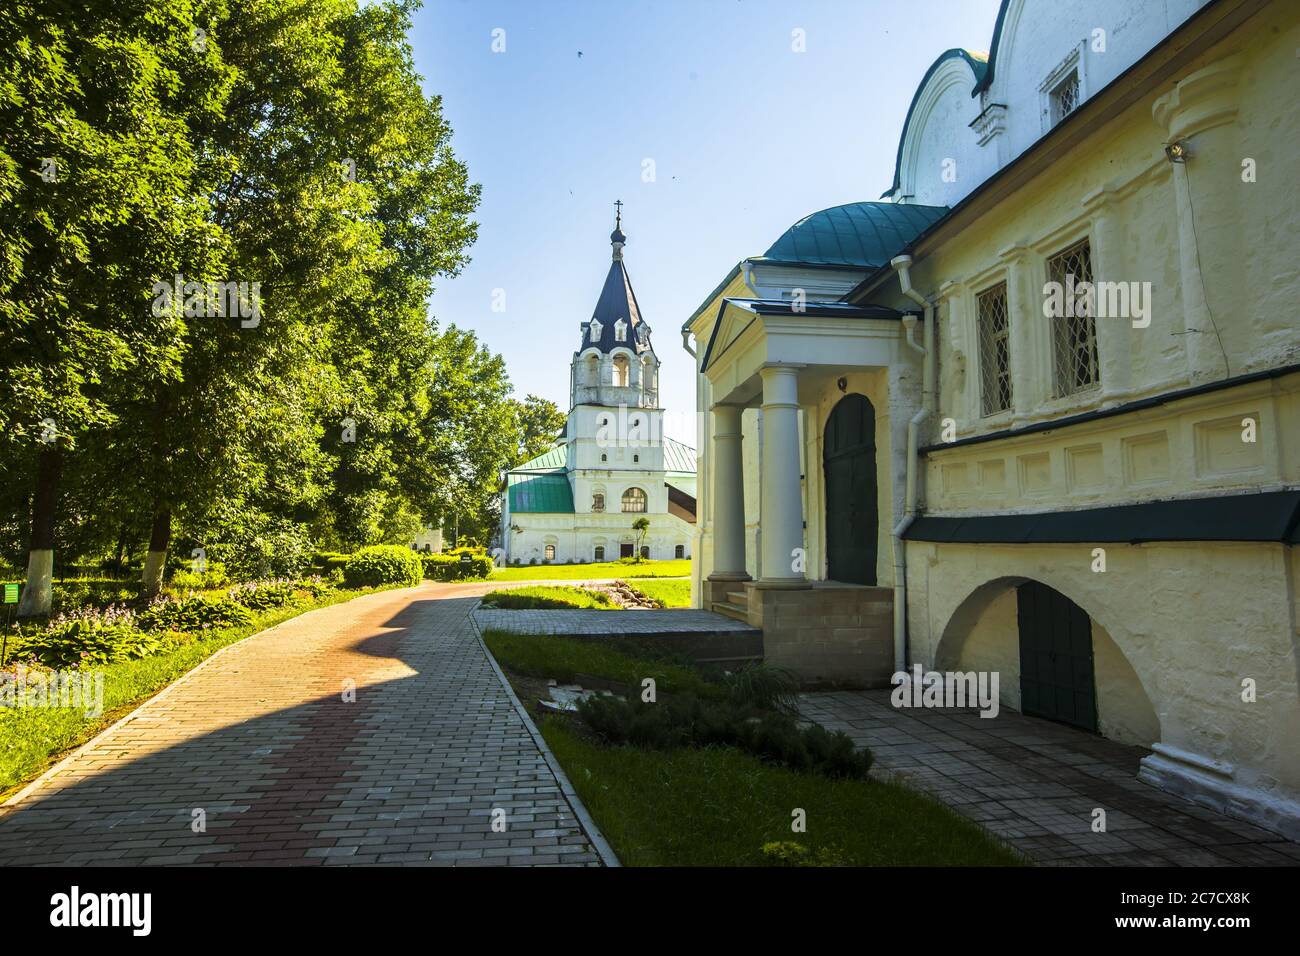 Beautiful shot of monastery near trees in the city of Alexandrov at Russia Stock Photo